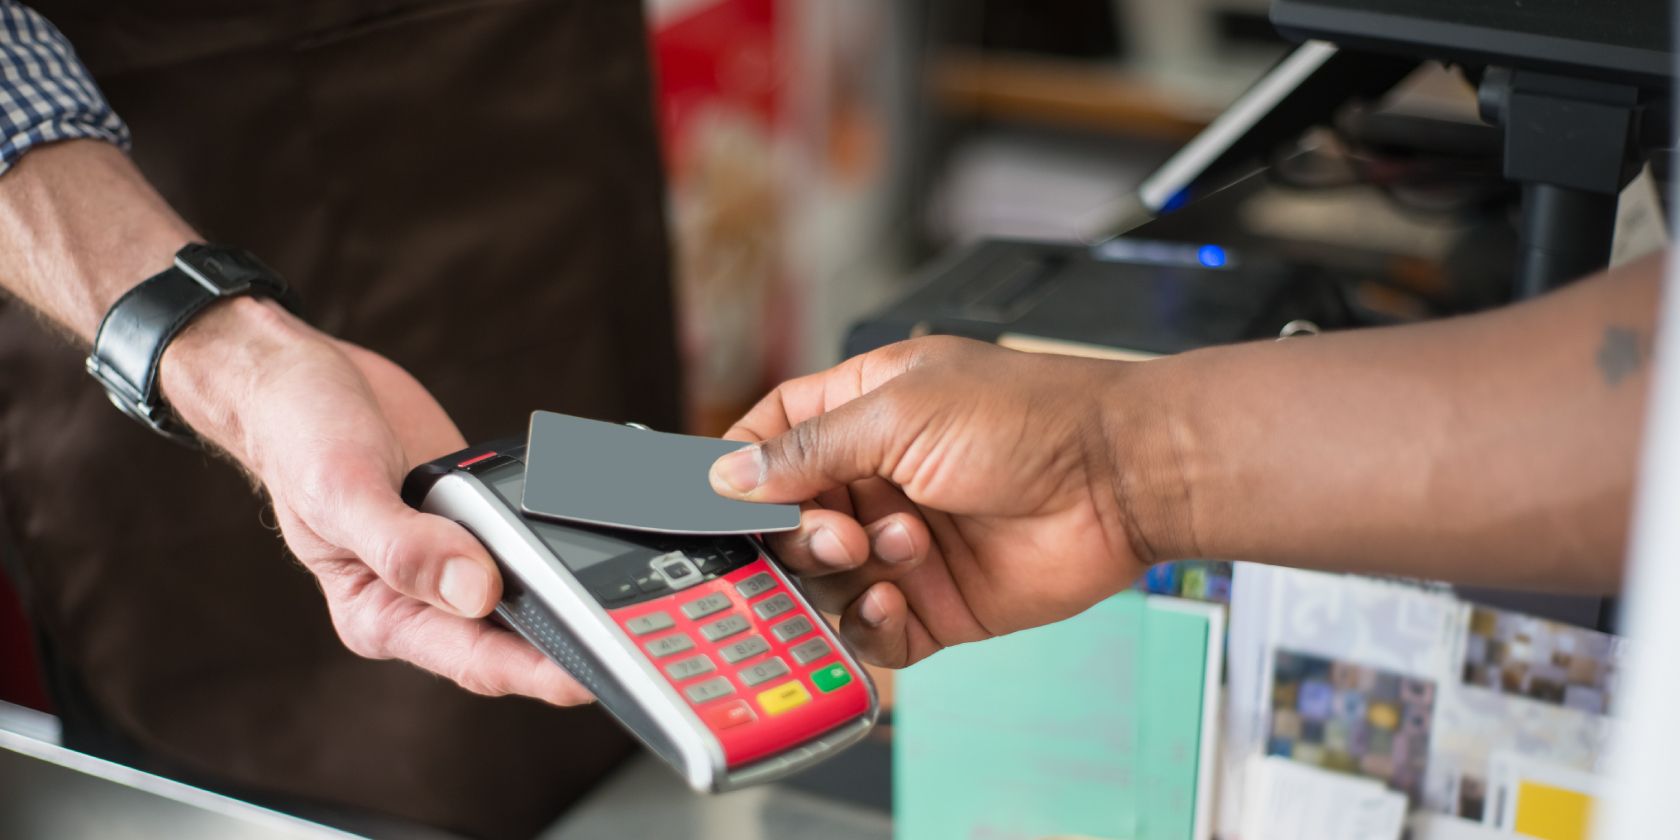 What Is Point-of-Sale (POS) Malware and How Can You Protect Your Business From It?